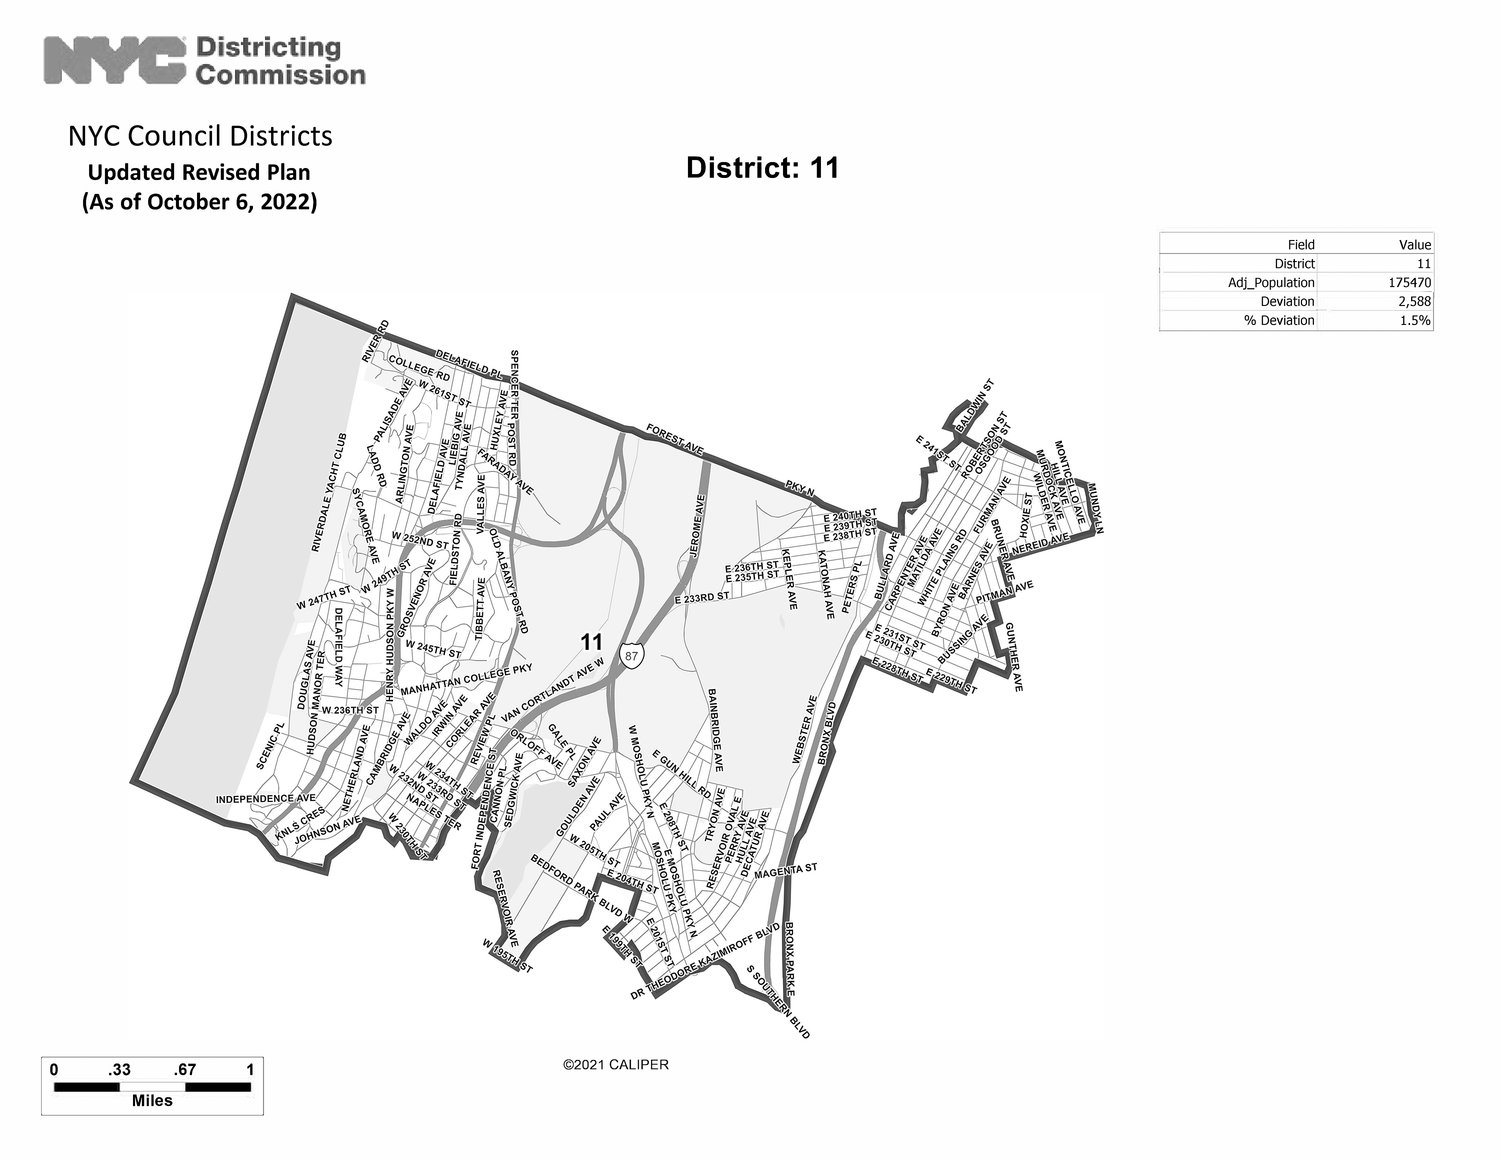 As the city’s redistricting commission has drawn it, the new district represented by Eric Dinowitz looks much the same as it does now. Dinowitz had testified in a hearing to revert changes to his district, including making his district a majority Latino one.